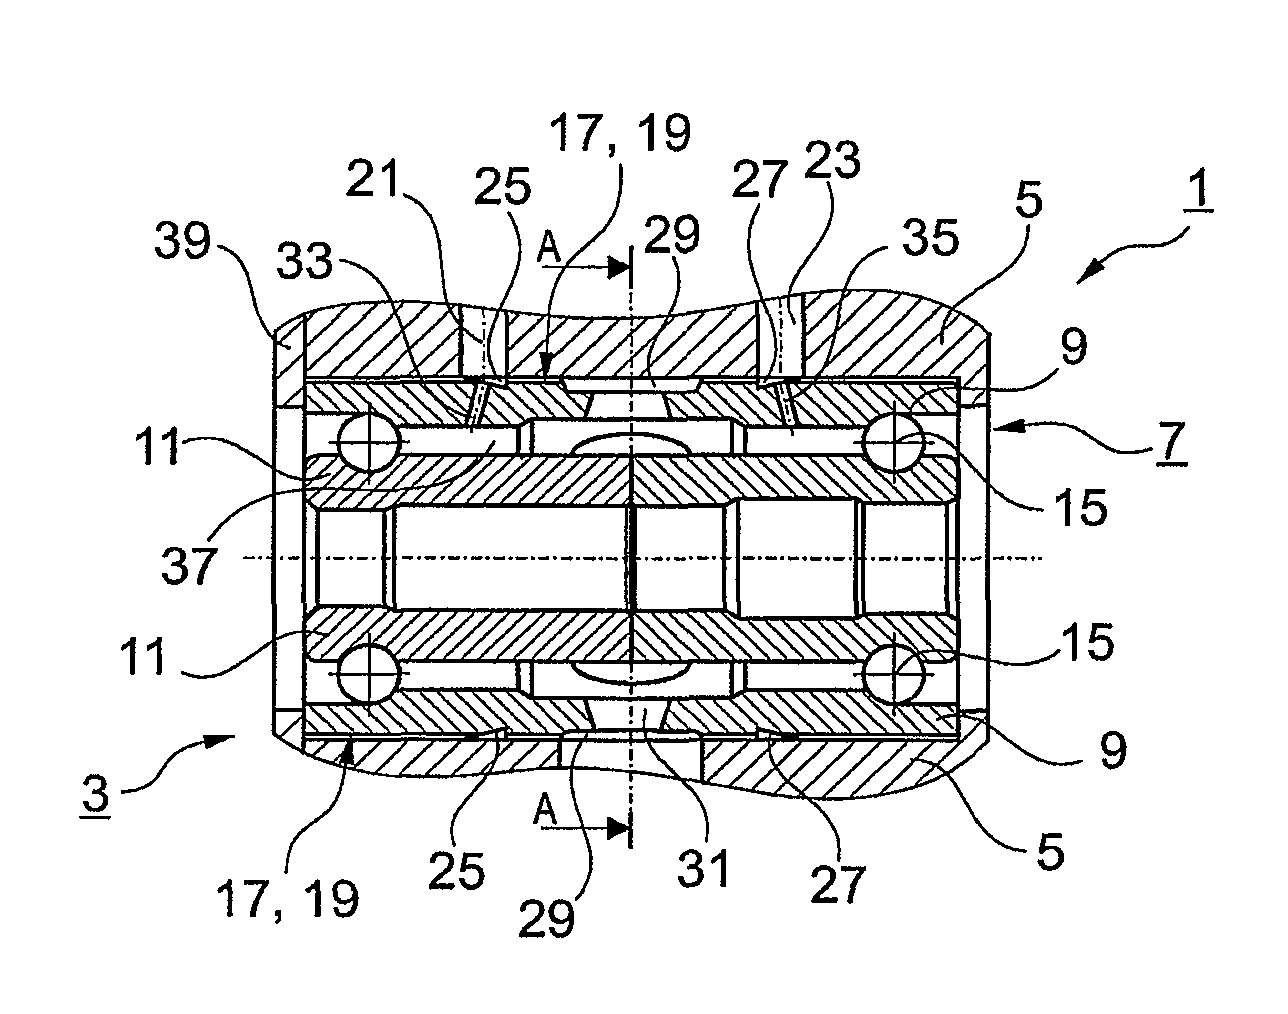 Bearing unit for a turbocharger